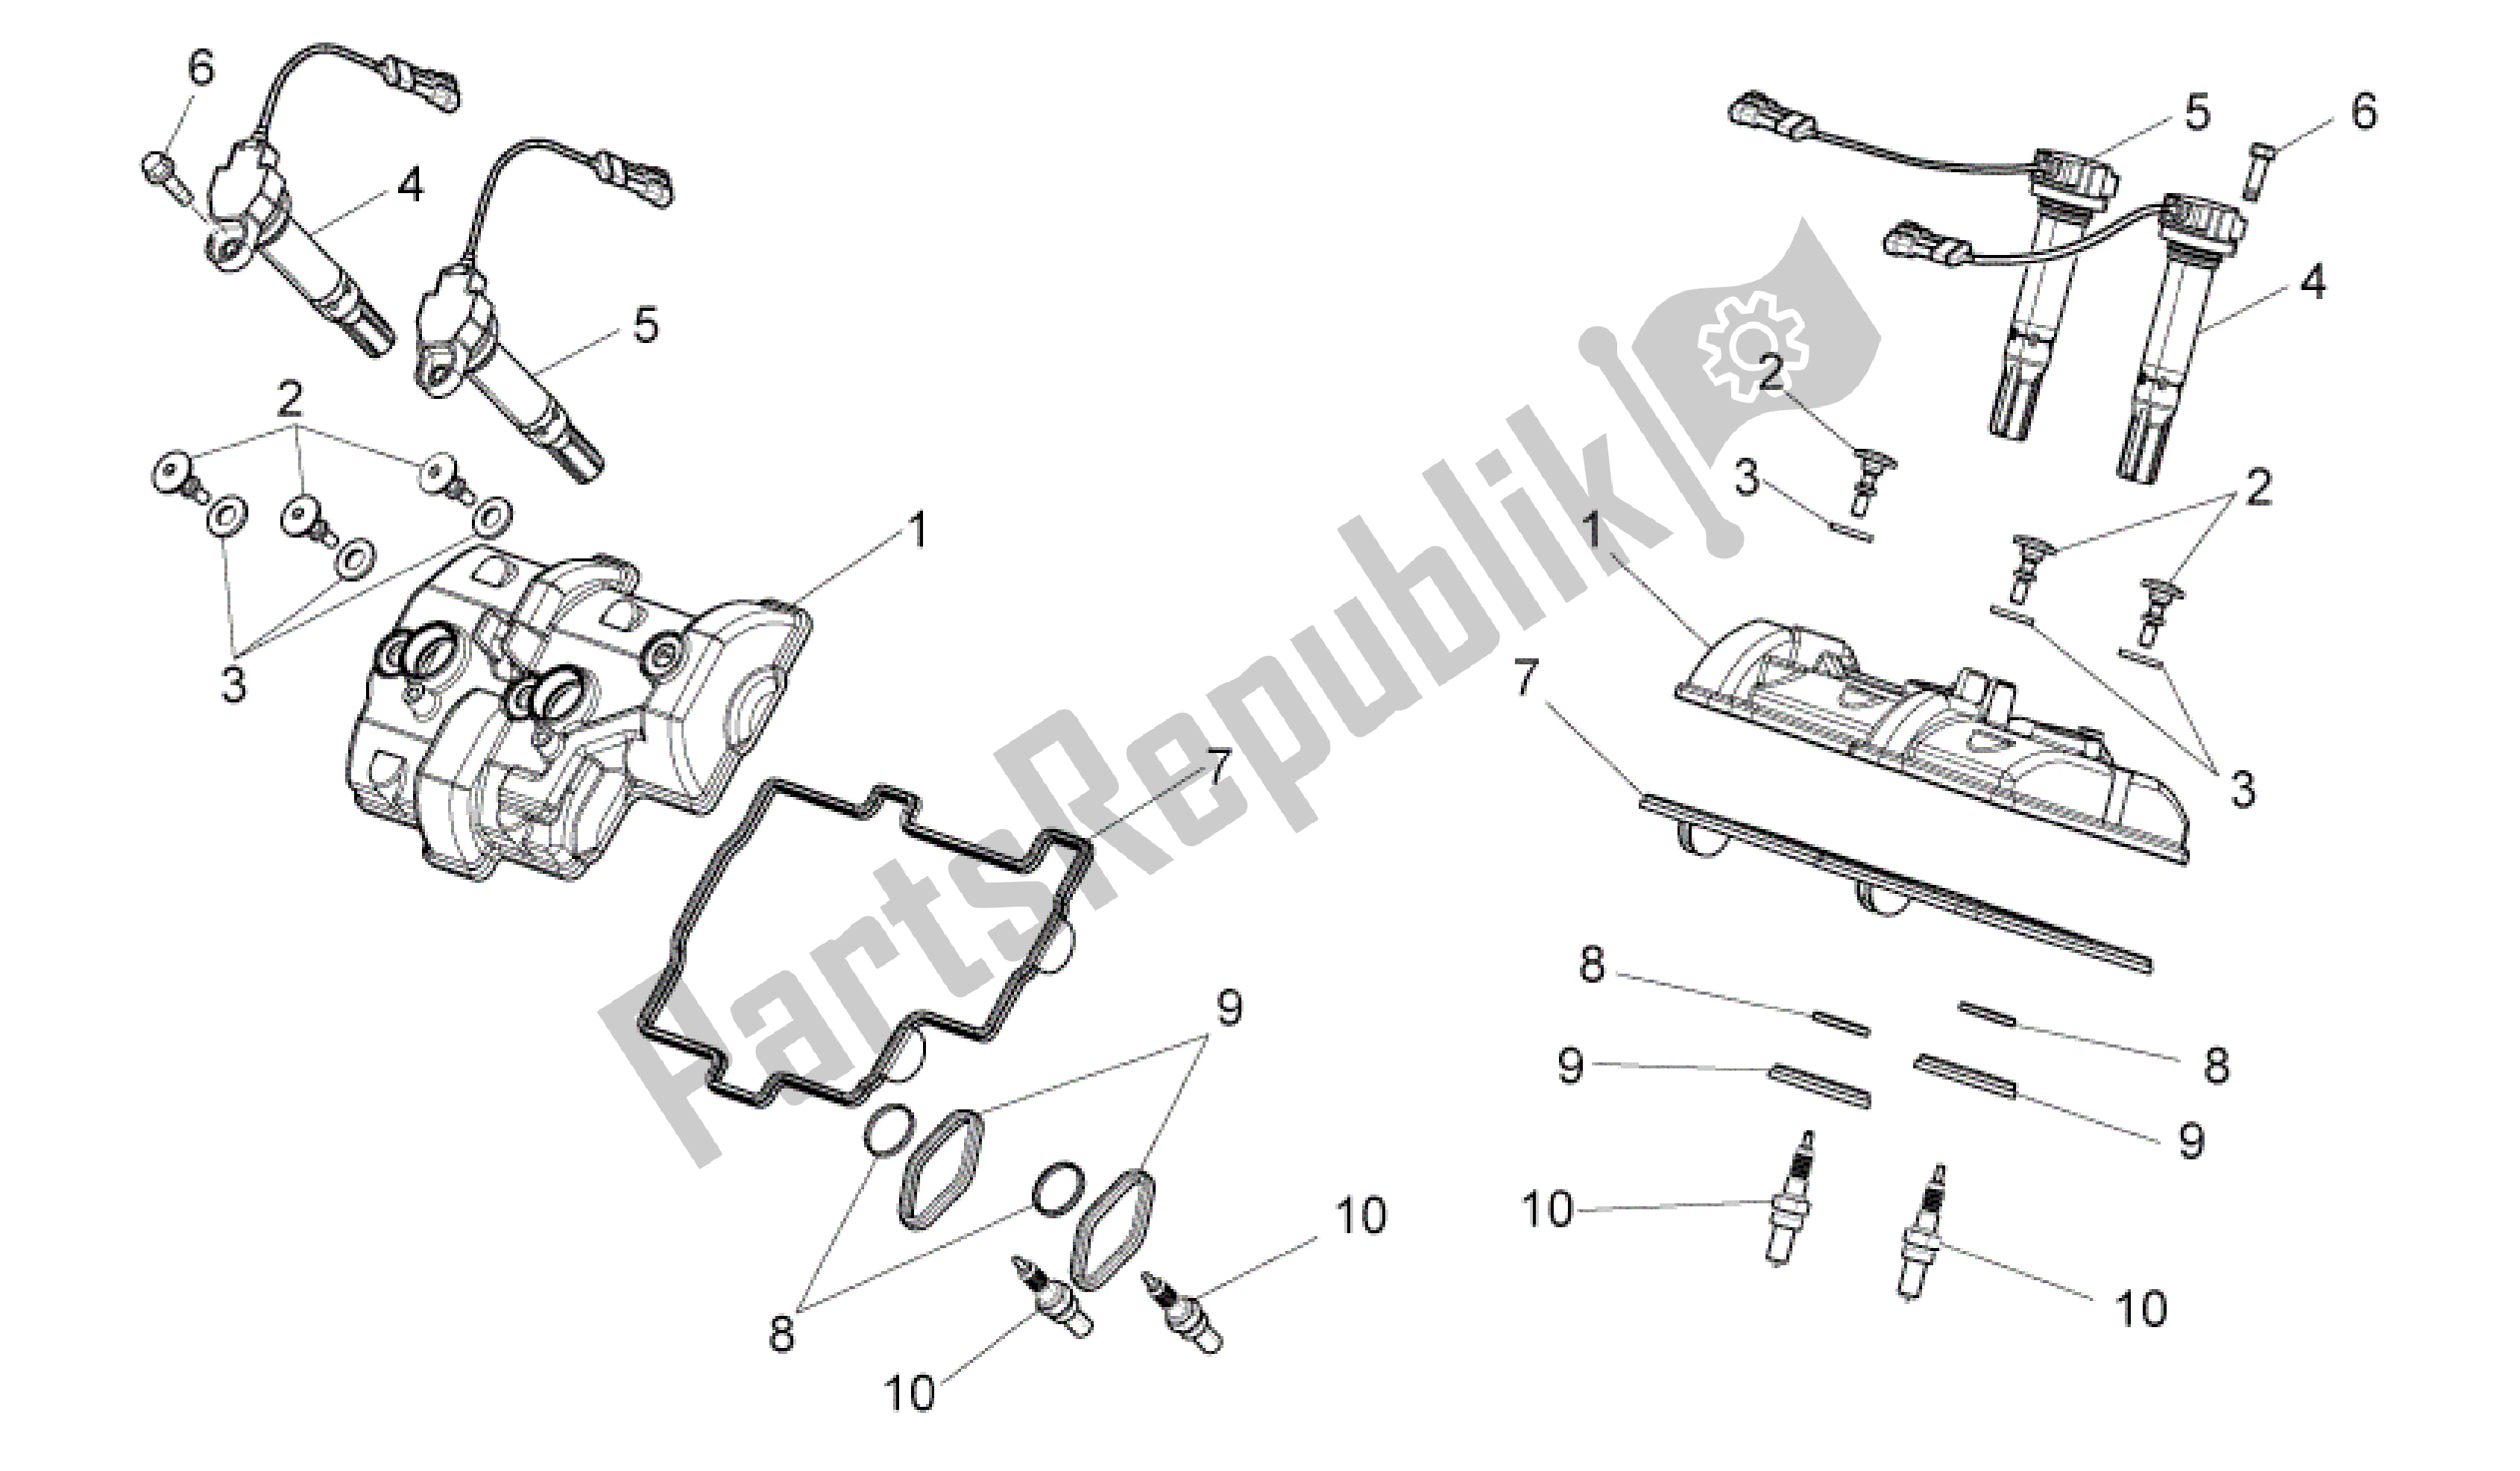 All parts for the Valves Cover of the Aprilia RSV4 Aprc R 3982 1000 2011 - 2012